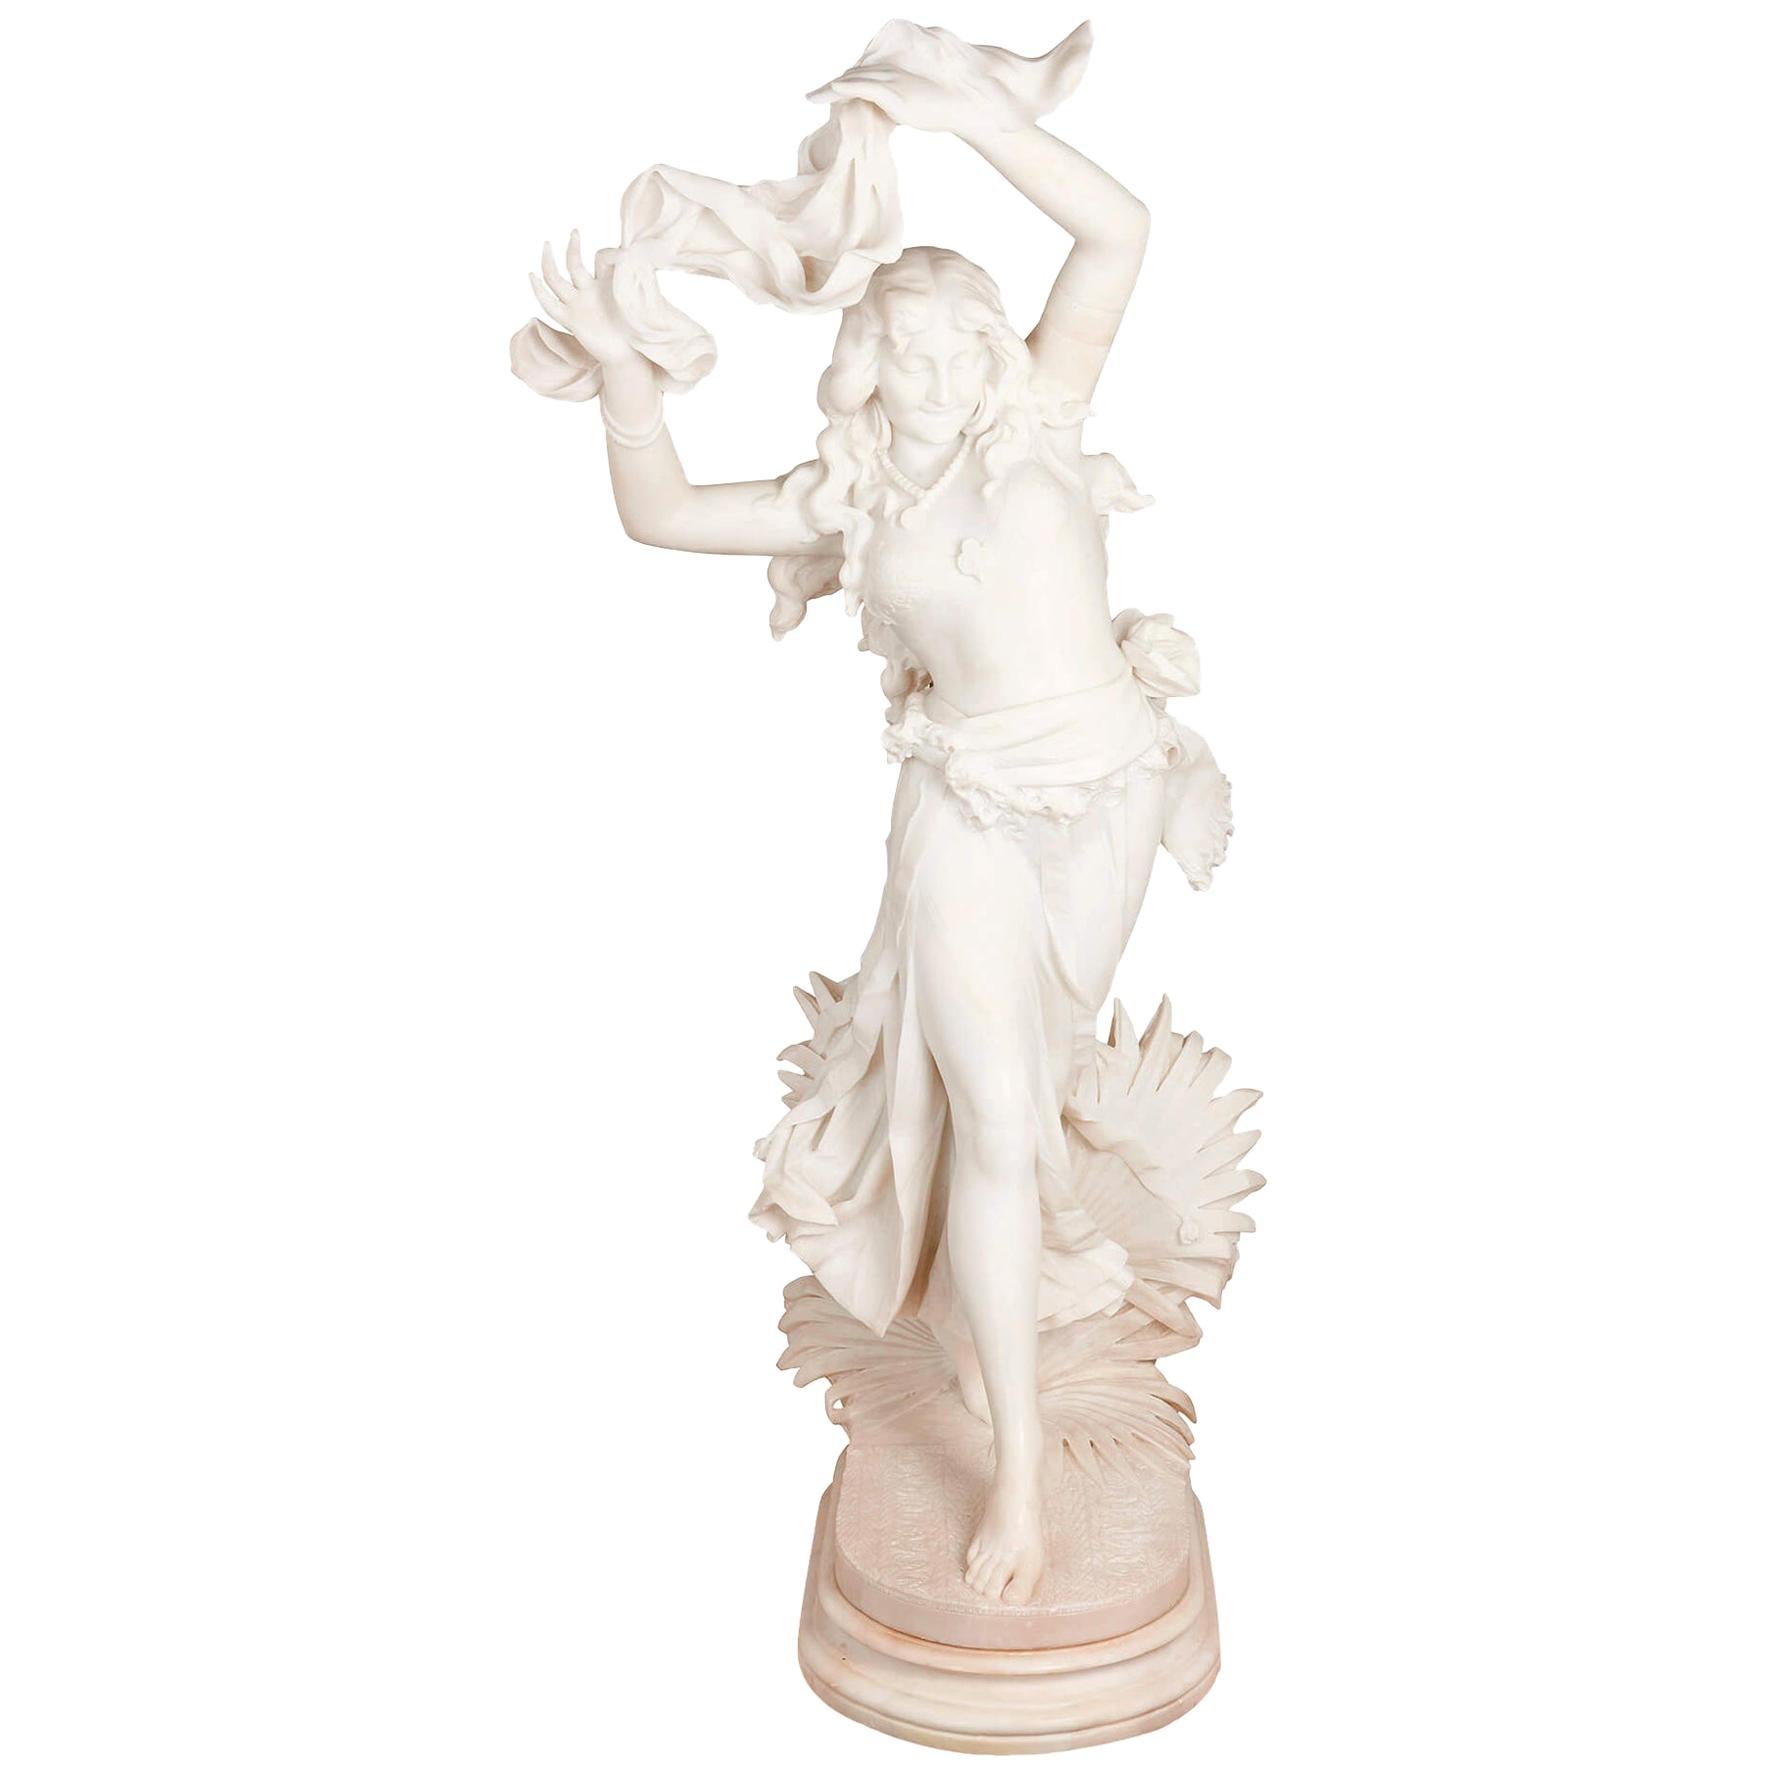 Marble Sculpture by Vichi, 'Exotic Dancer', for 1914, French Salon For Sale